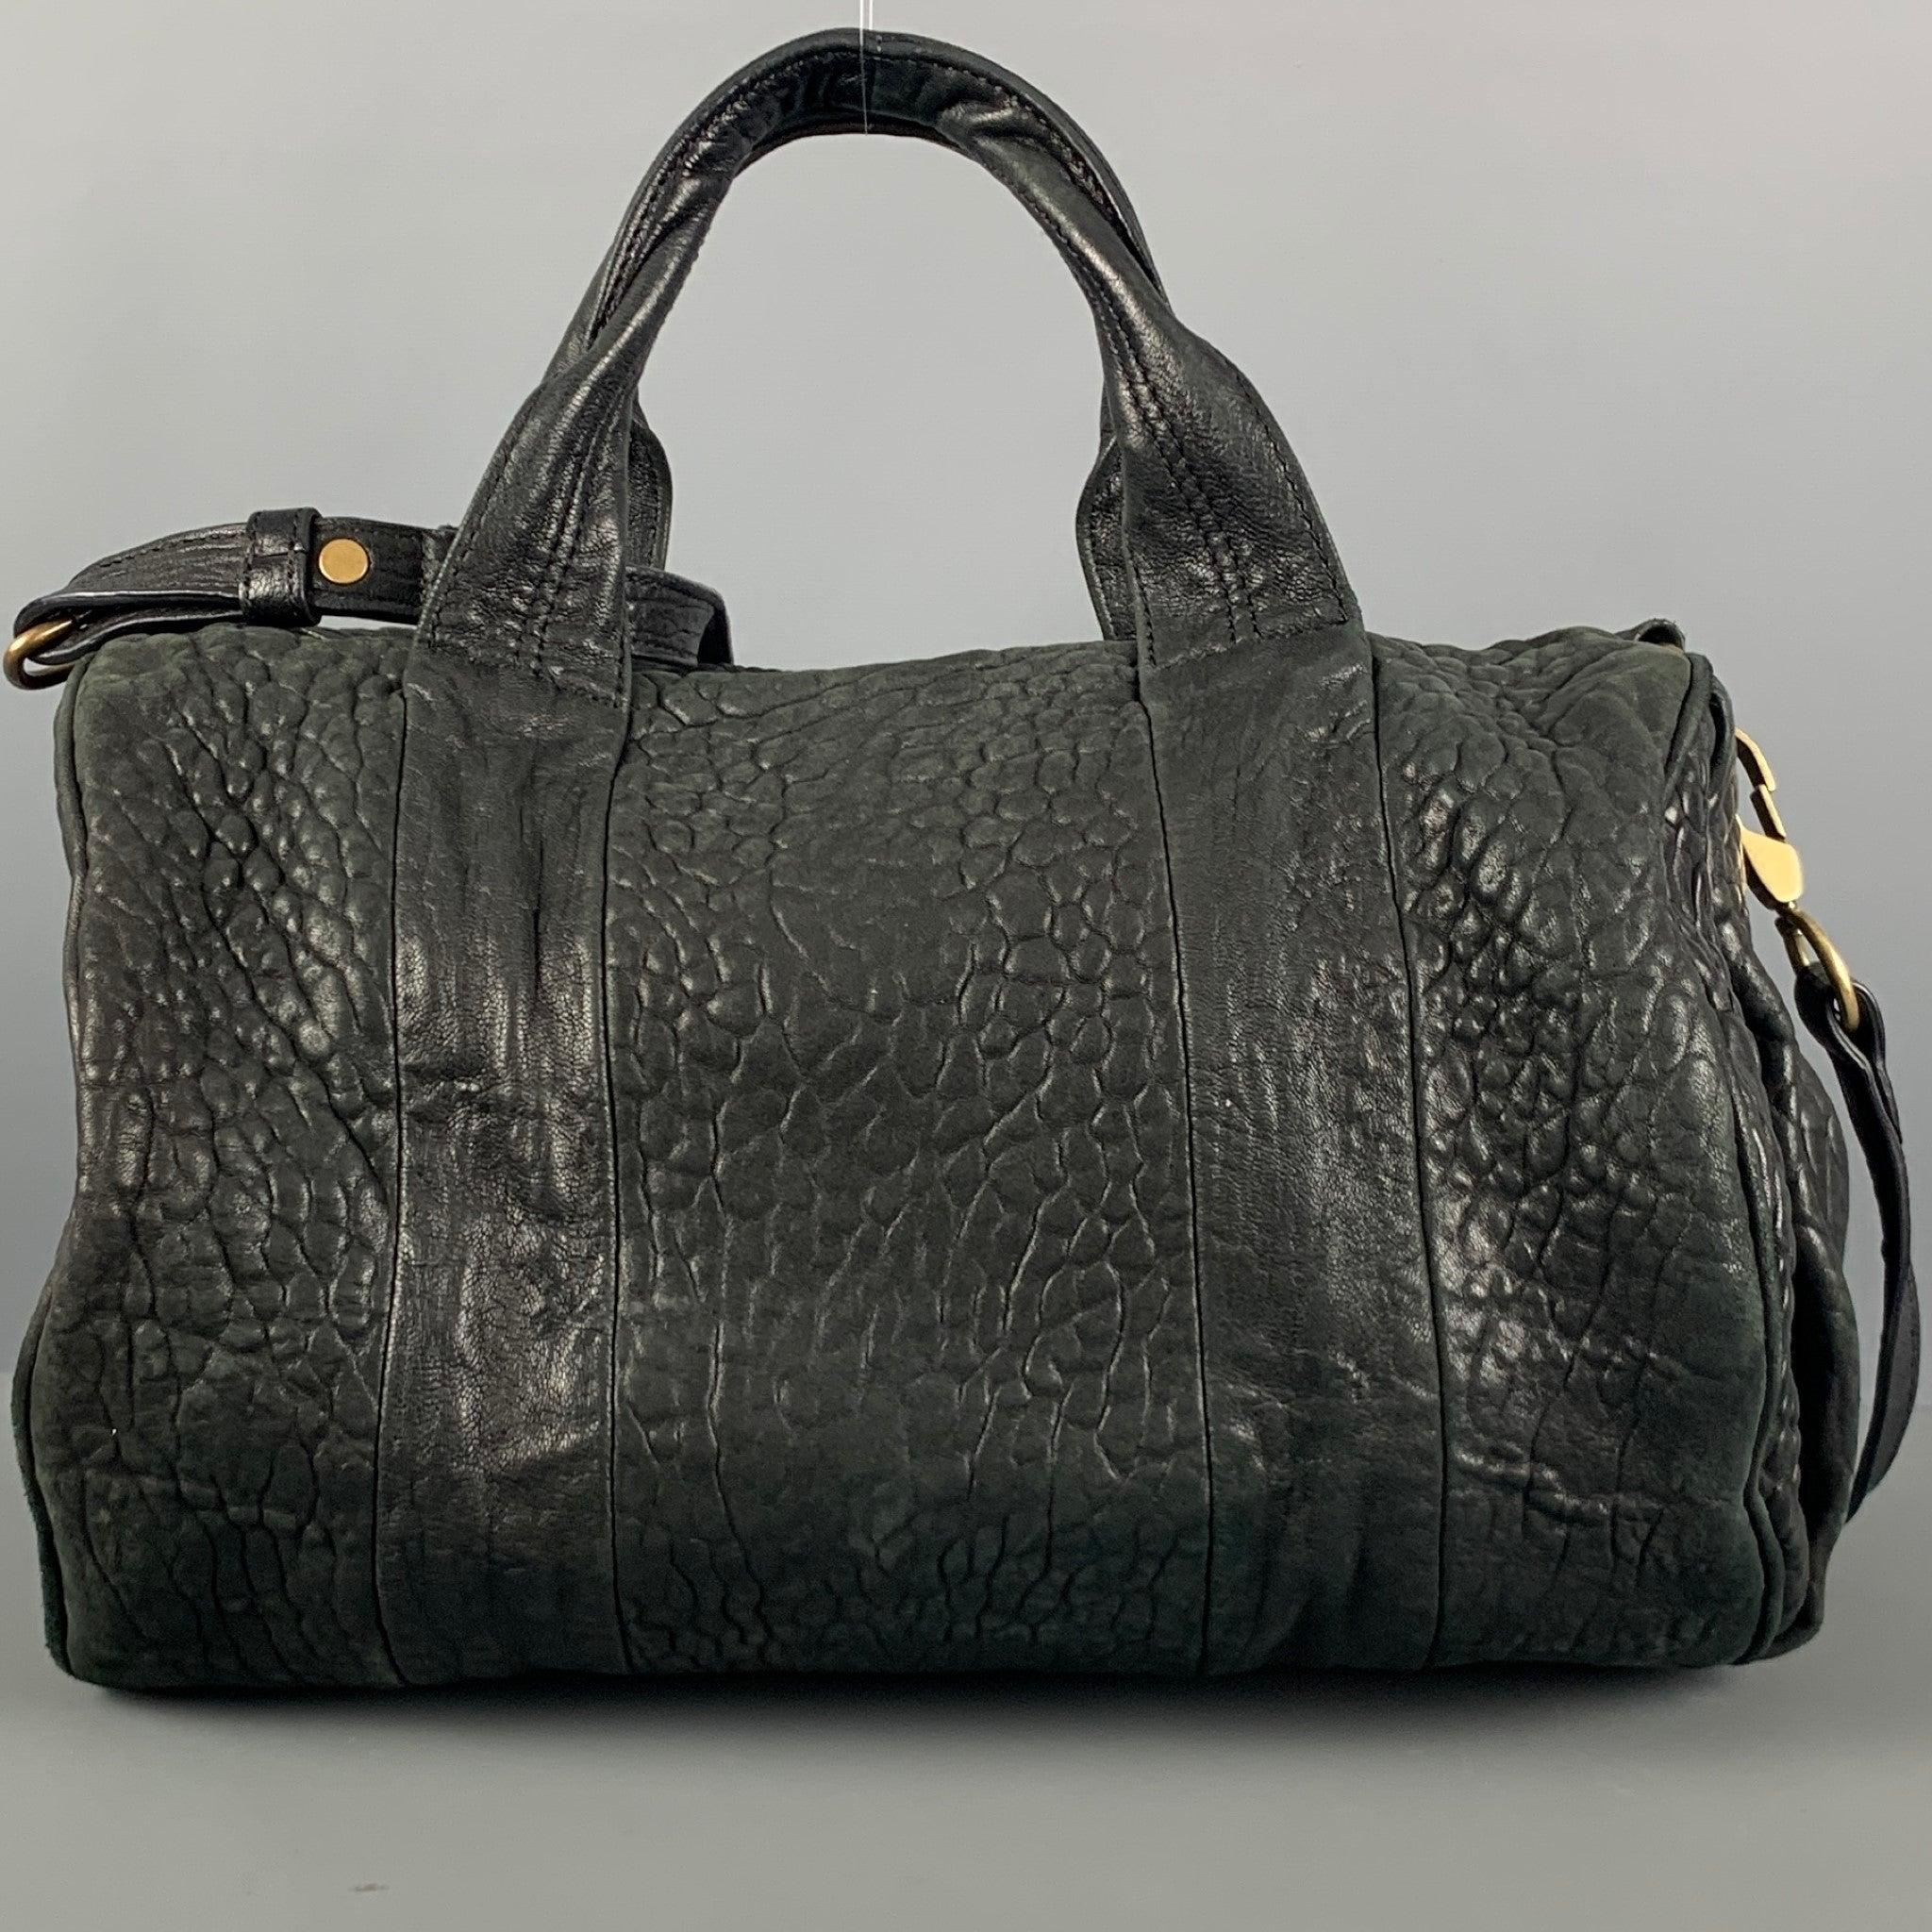 ALEXANDER WANG Black Wrinkled Leather Handbag In Good Condition For Sale In San Francisco, CA